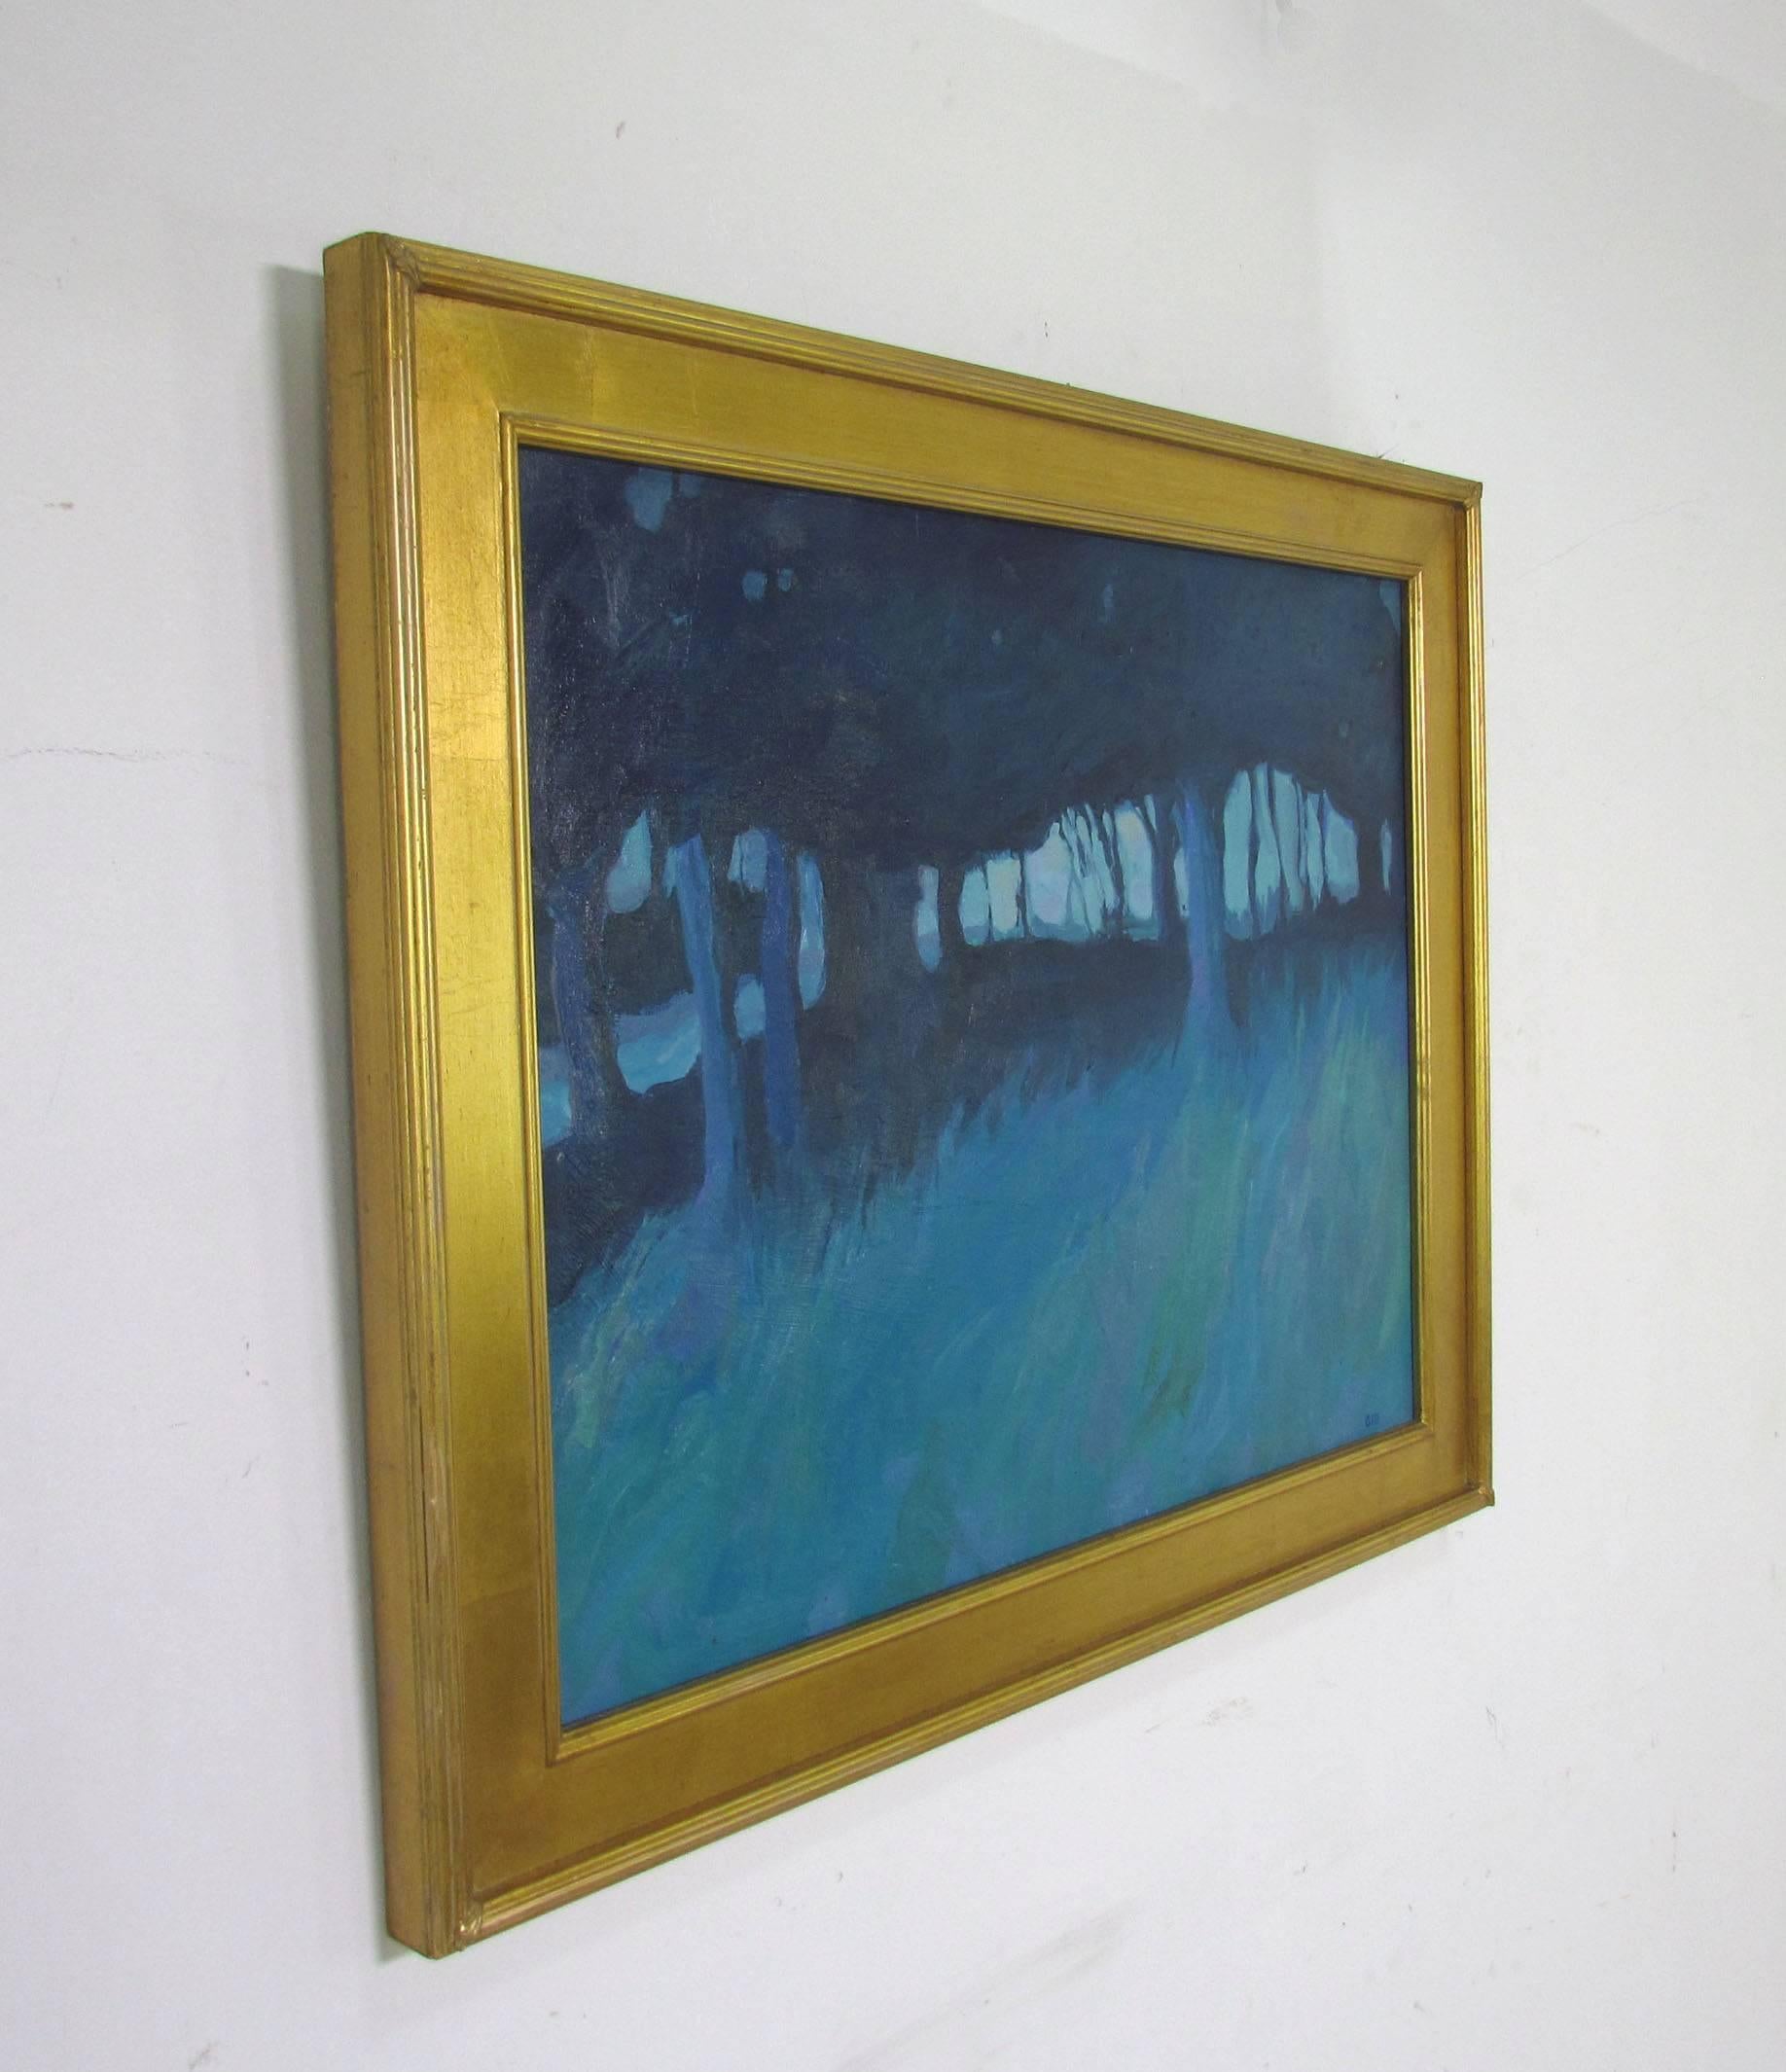 A post impressionistic and ethereal landscape oil on canvas signed Anne Gill, dated 1968, in a gold leaf impressionist frame. Almost tonalist in composition, the blue tones of this work are gem like and particularly striking against the gold border